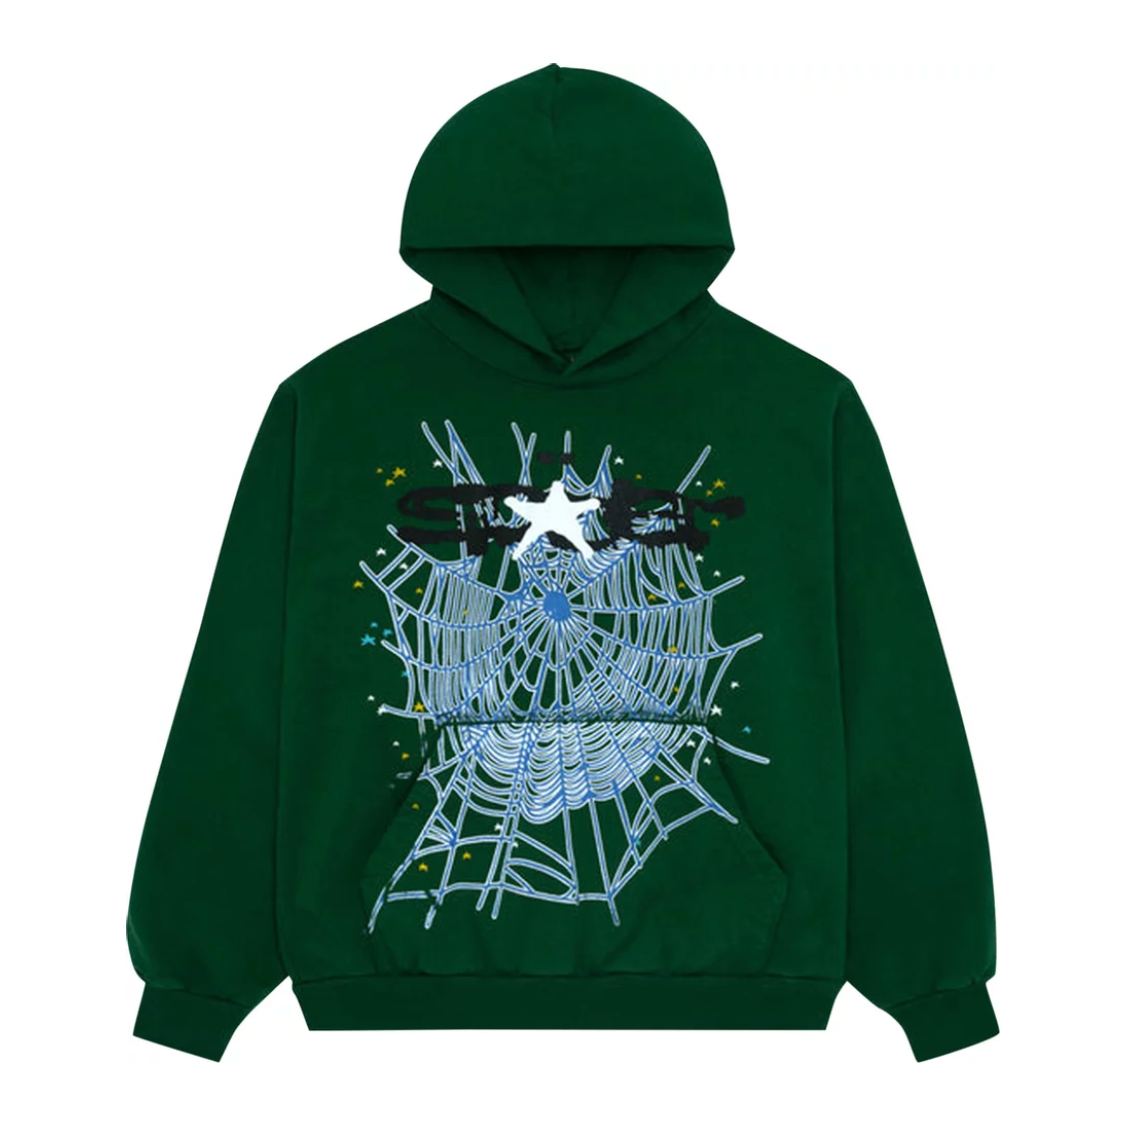 Sp5der Web Hoodie Hunter Green from Young Thug